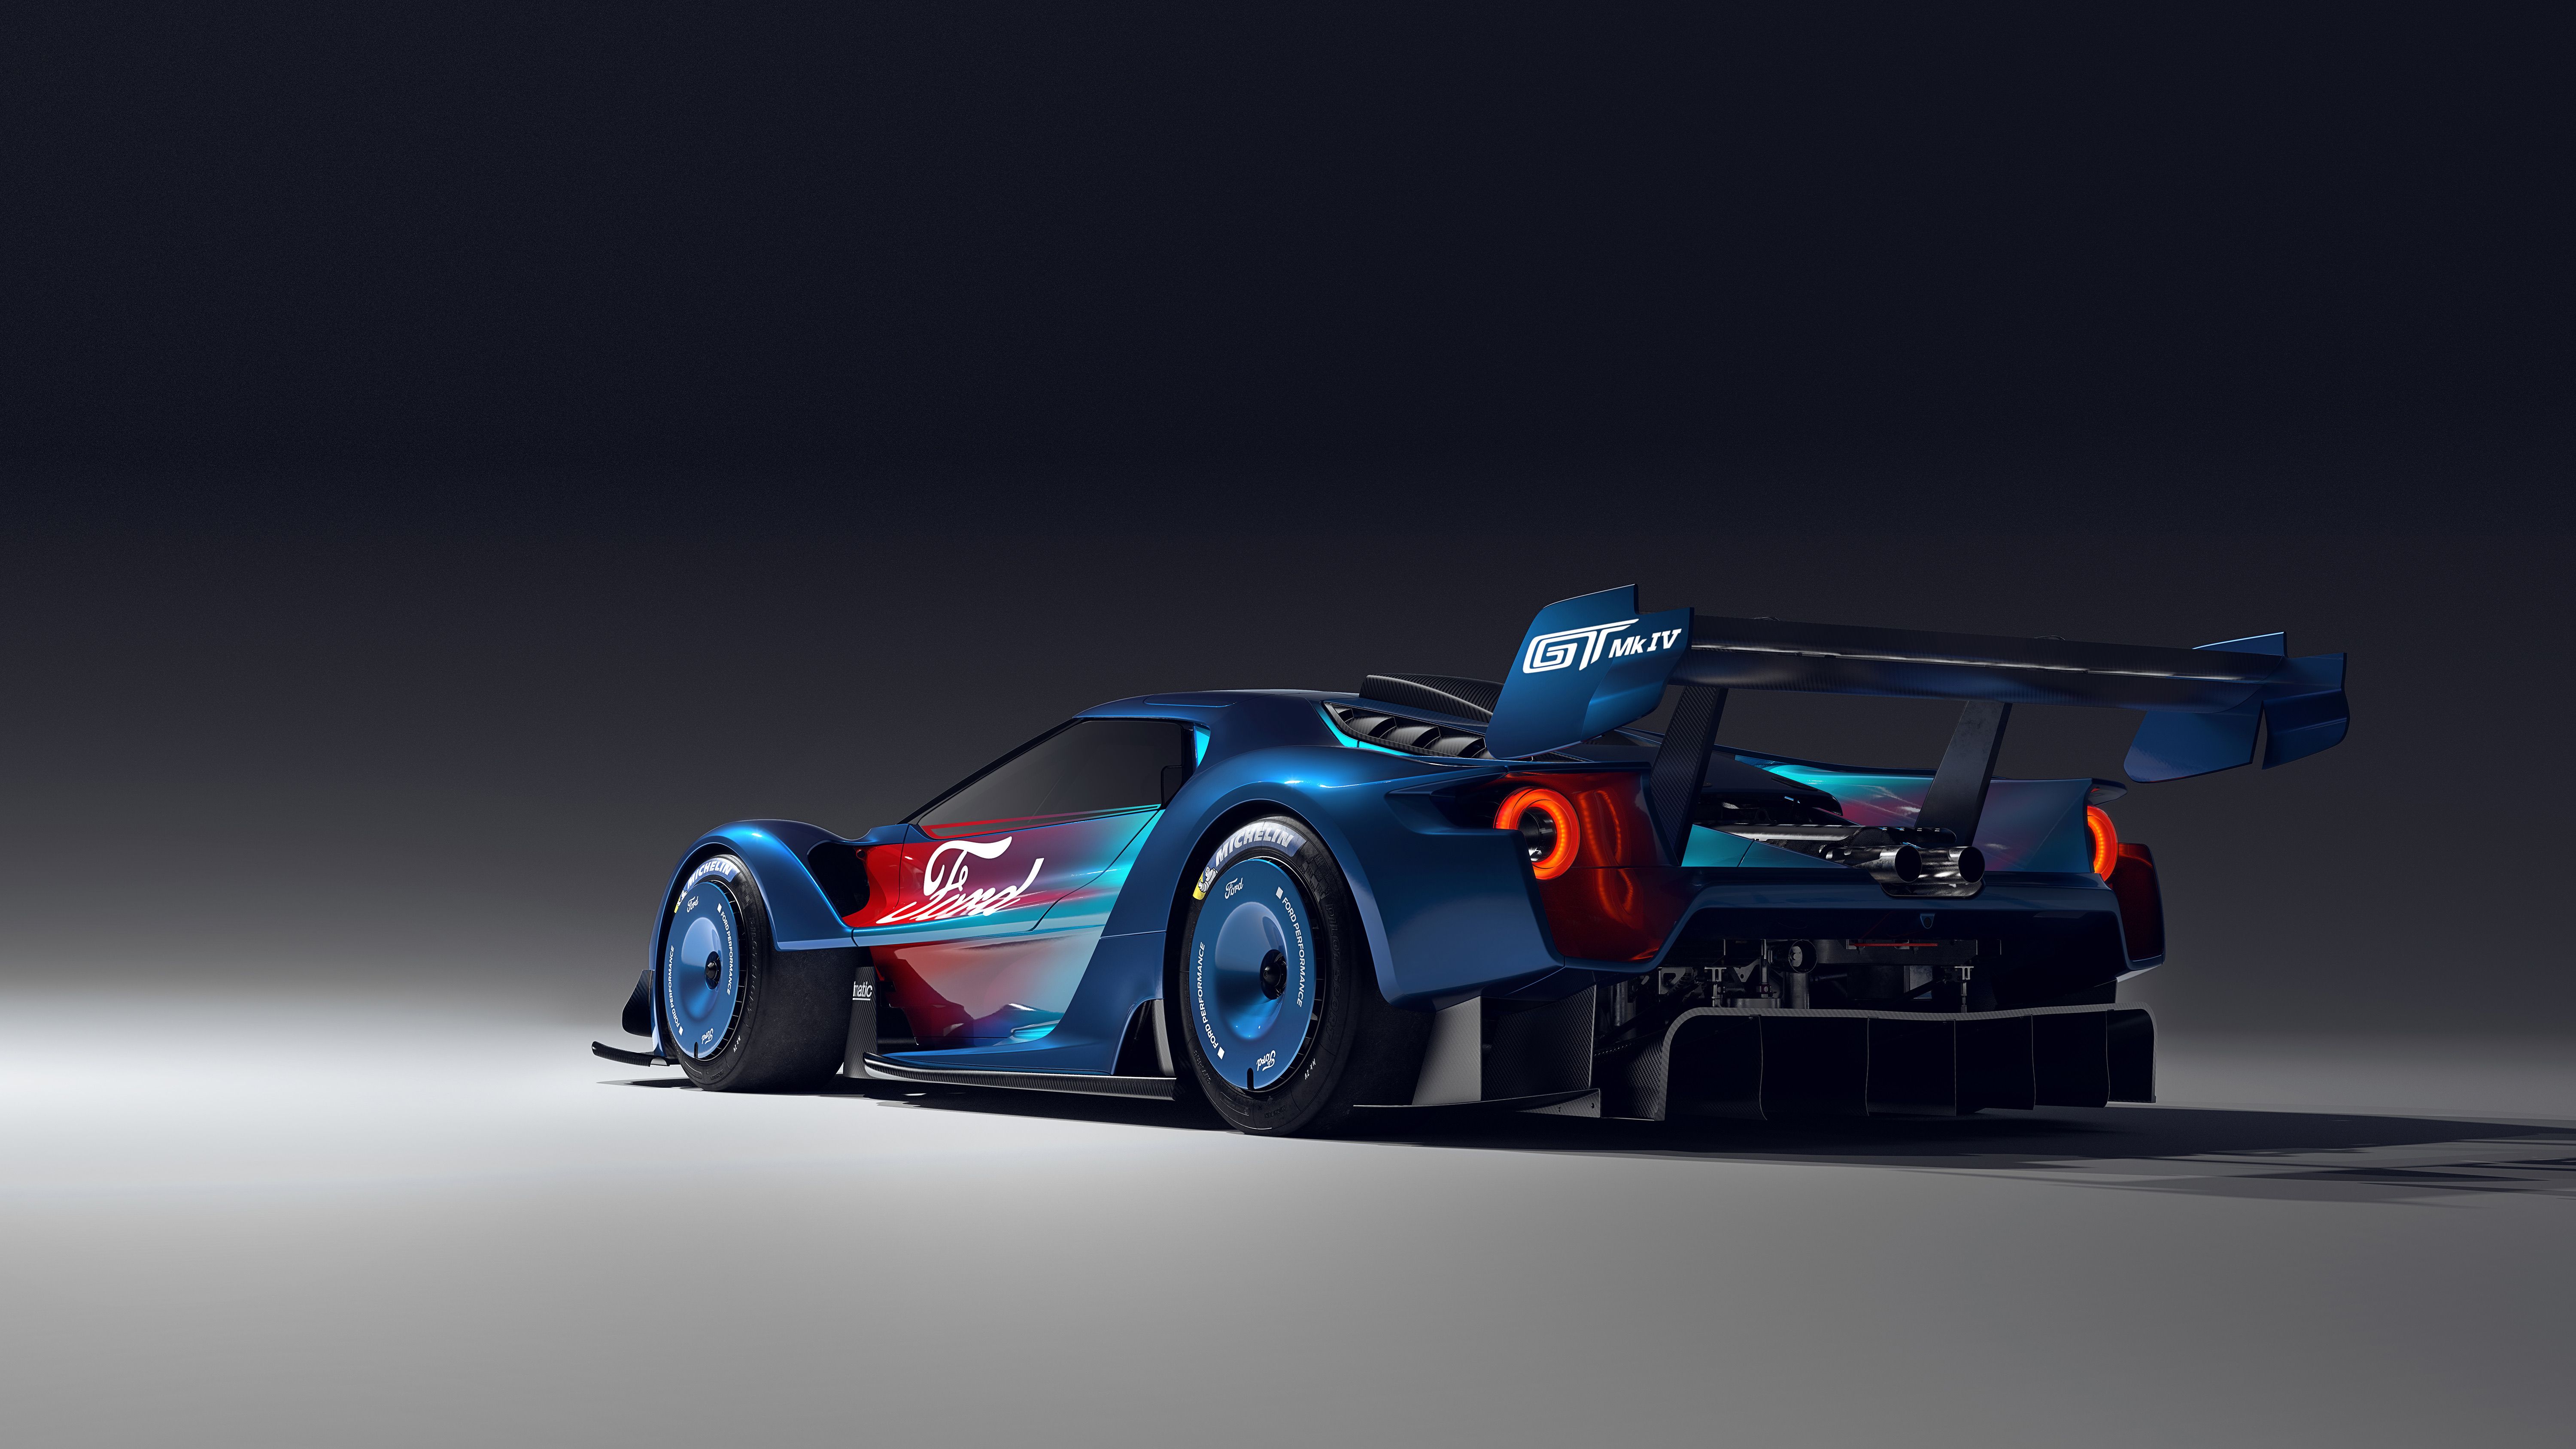 Carbon-Bodied Ford GT Will Have 1,500 HP Of Le Mans-Derived Fury